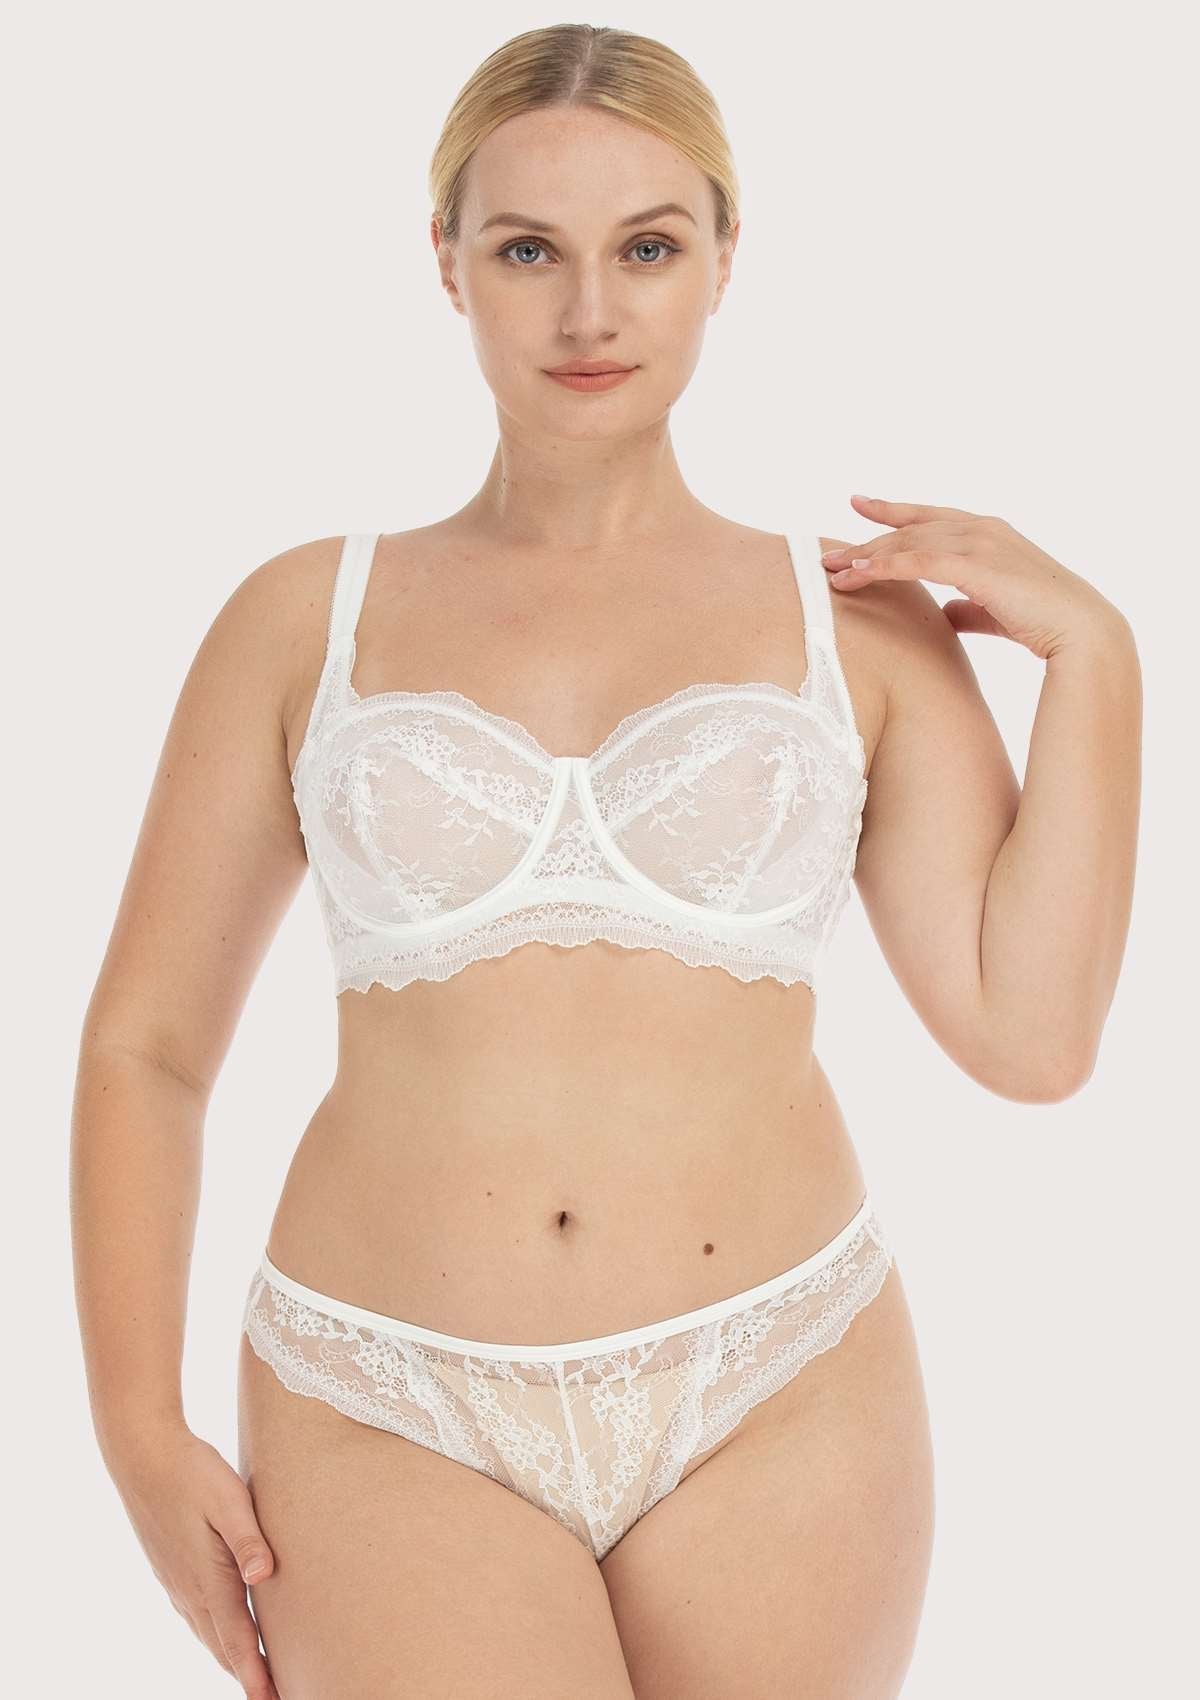 HSIA I Do Floral Lace Bridal Balconette Beautiful Bra For Special Day - White / 38 / D